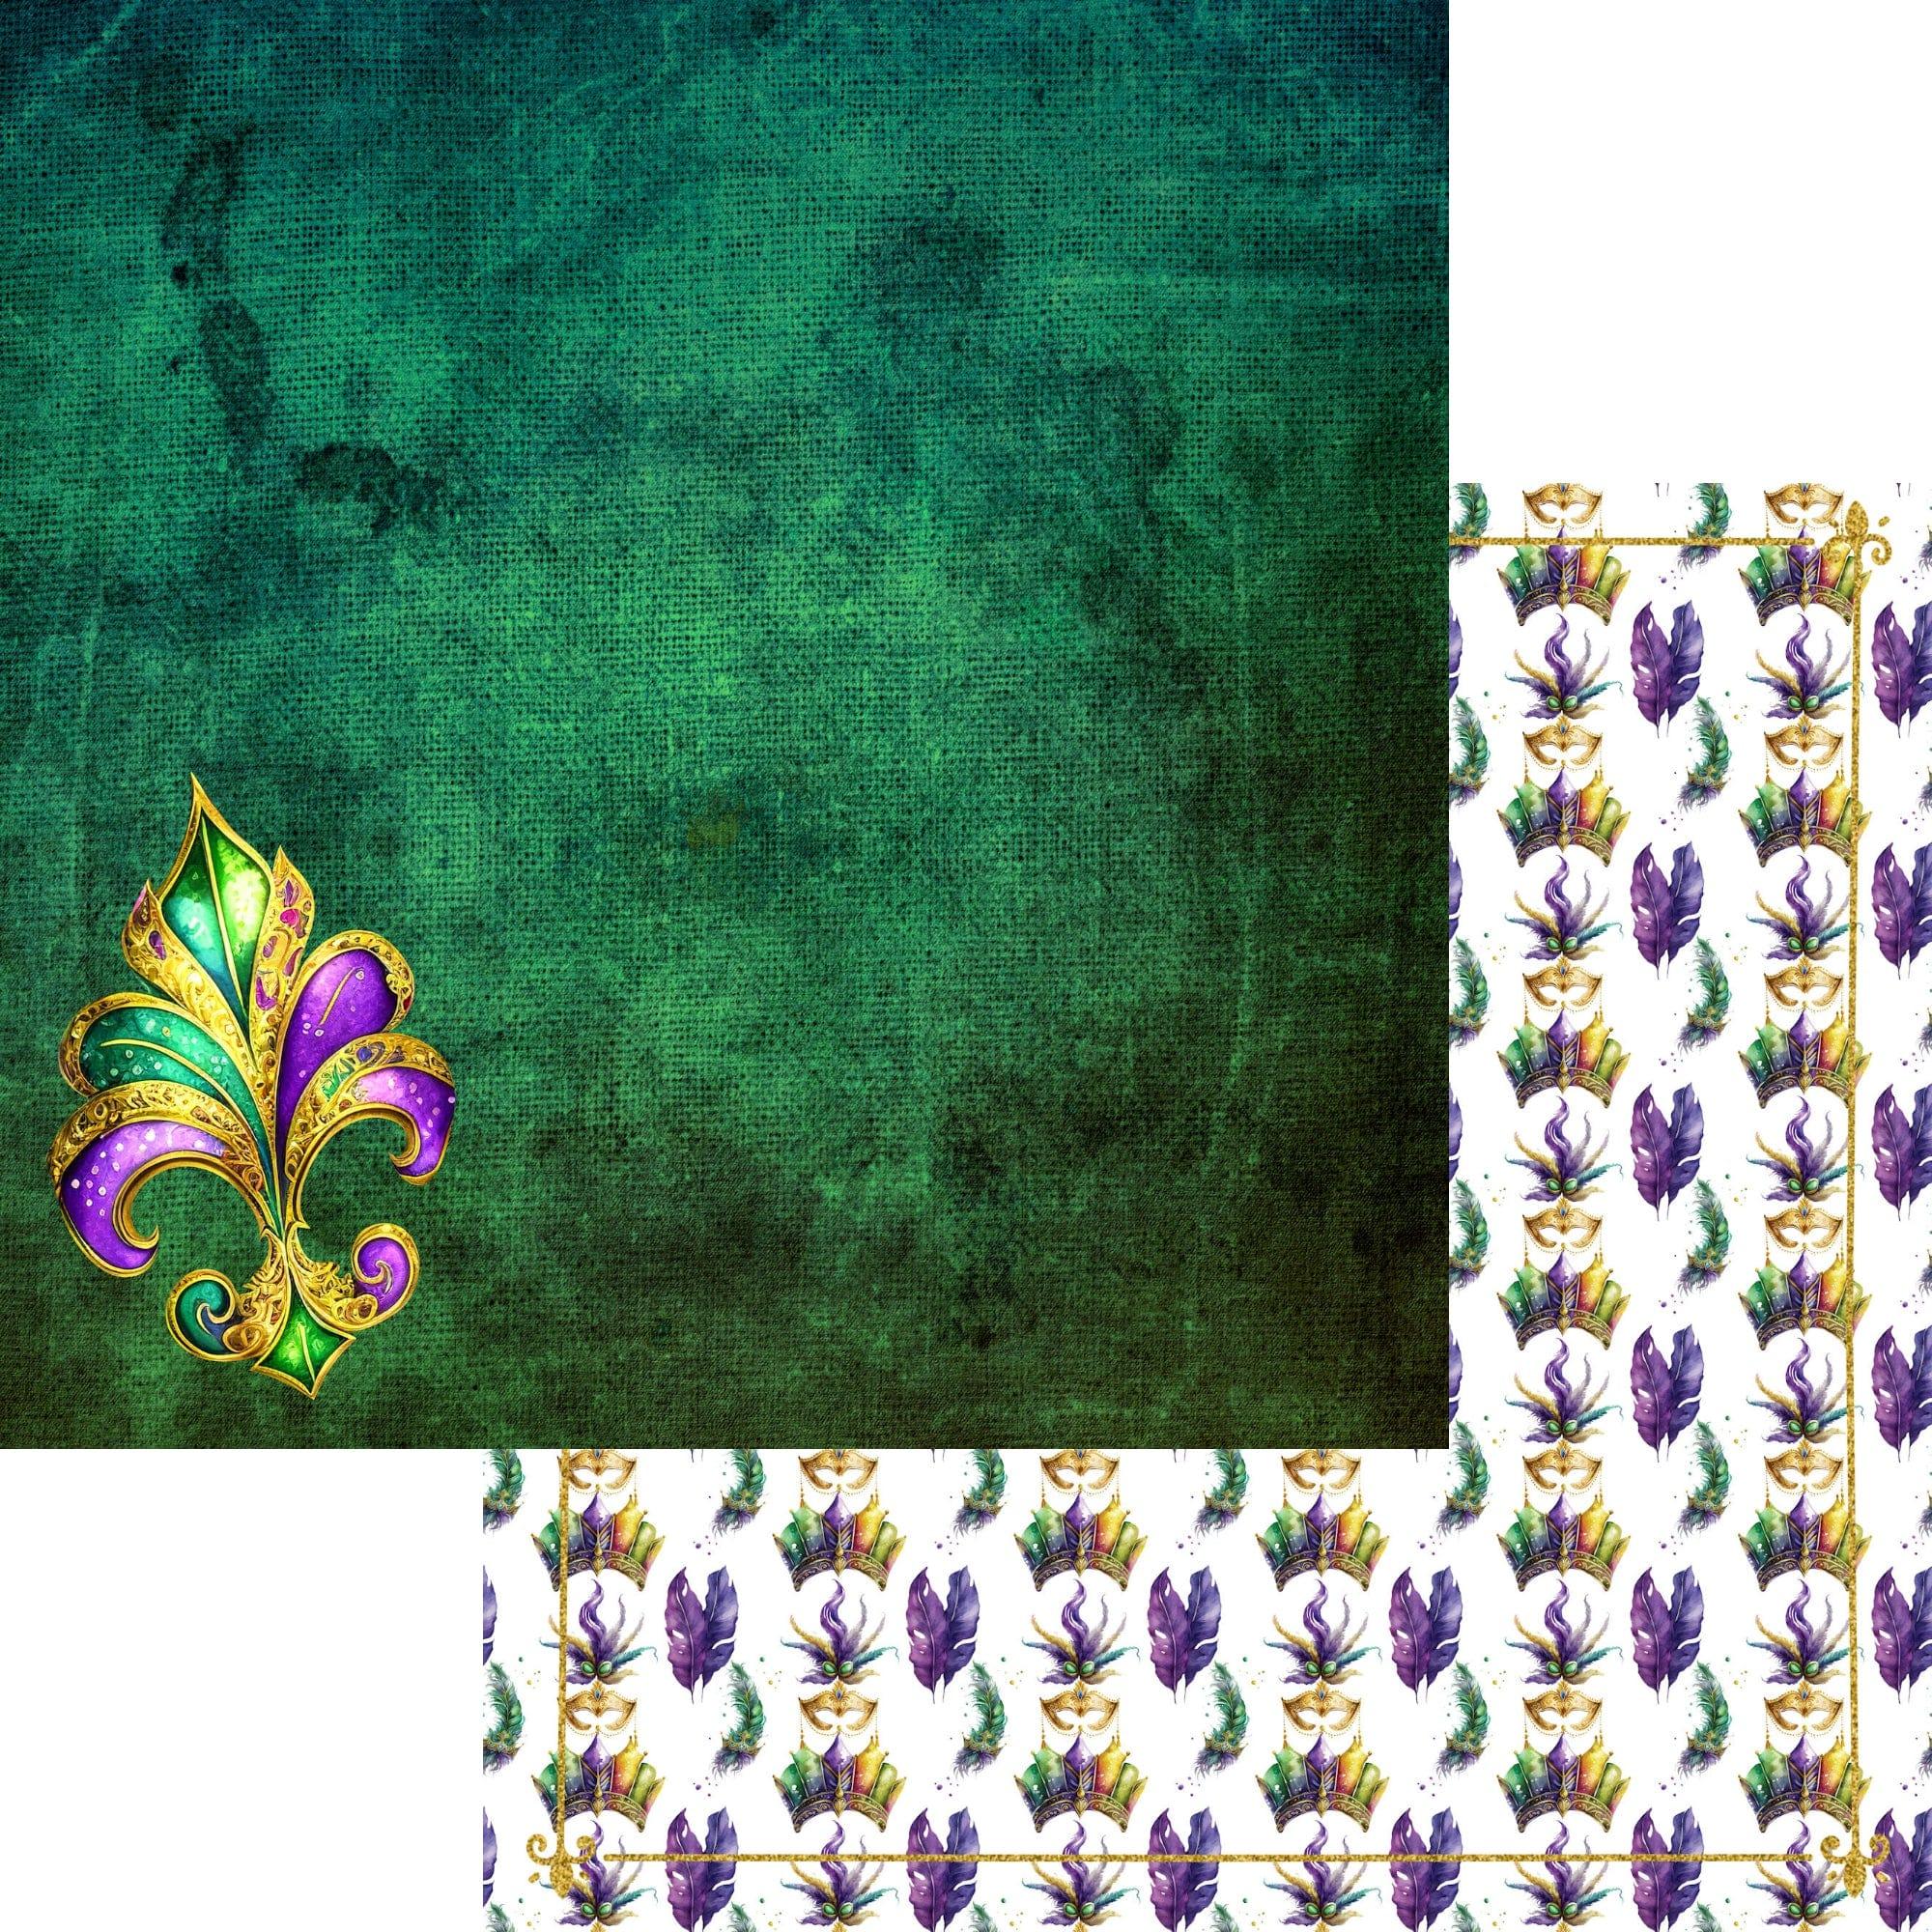 Mardi Gras Collection 12 x 12 Double-Sided Scrapbook Paper & Ephemera Embellishments Kit by SSC Designs - Scrapbook Supply Companies